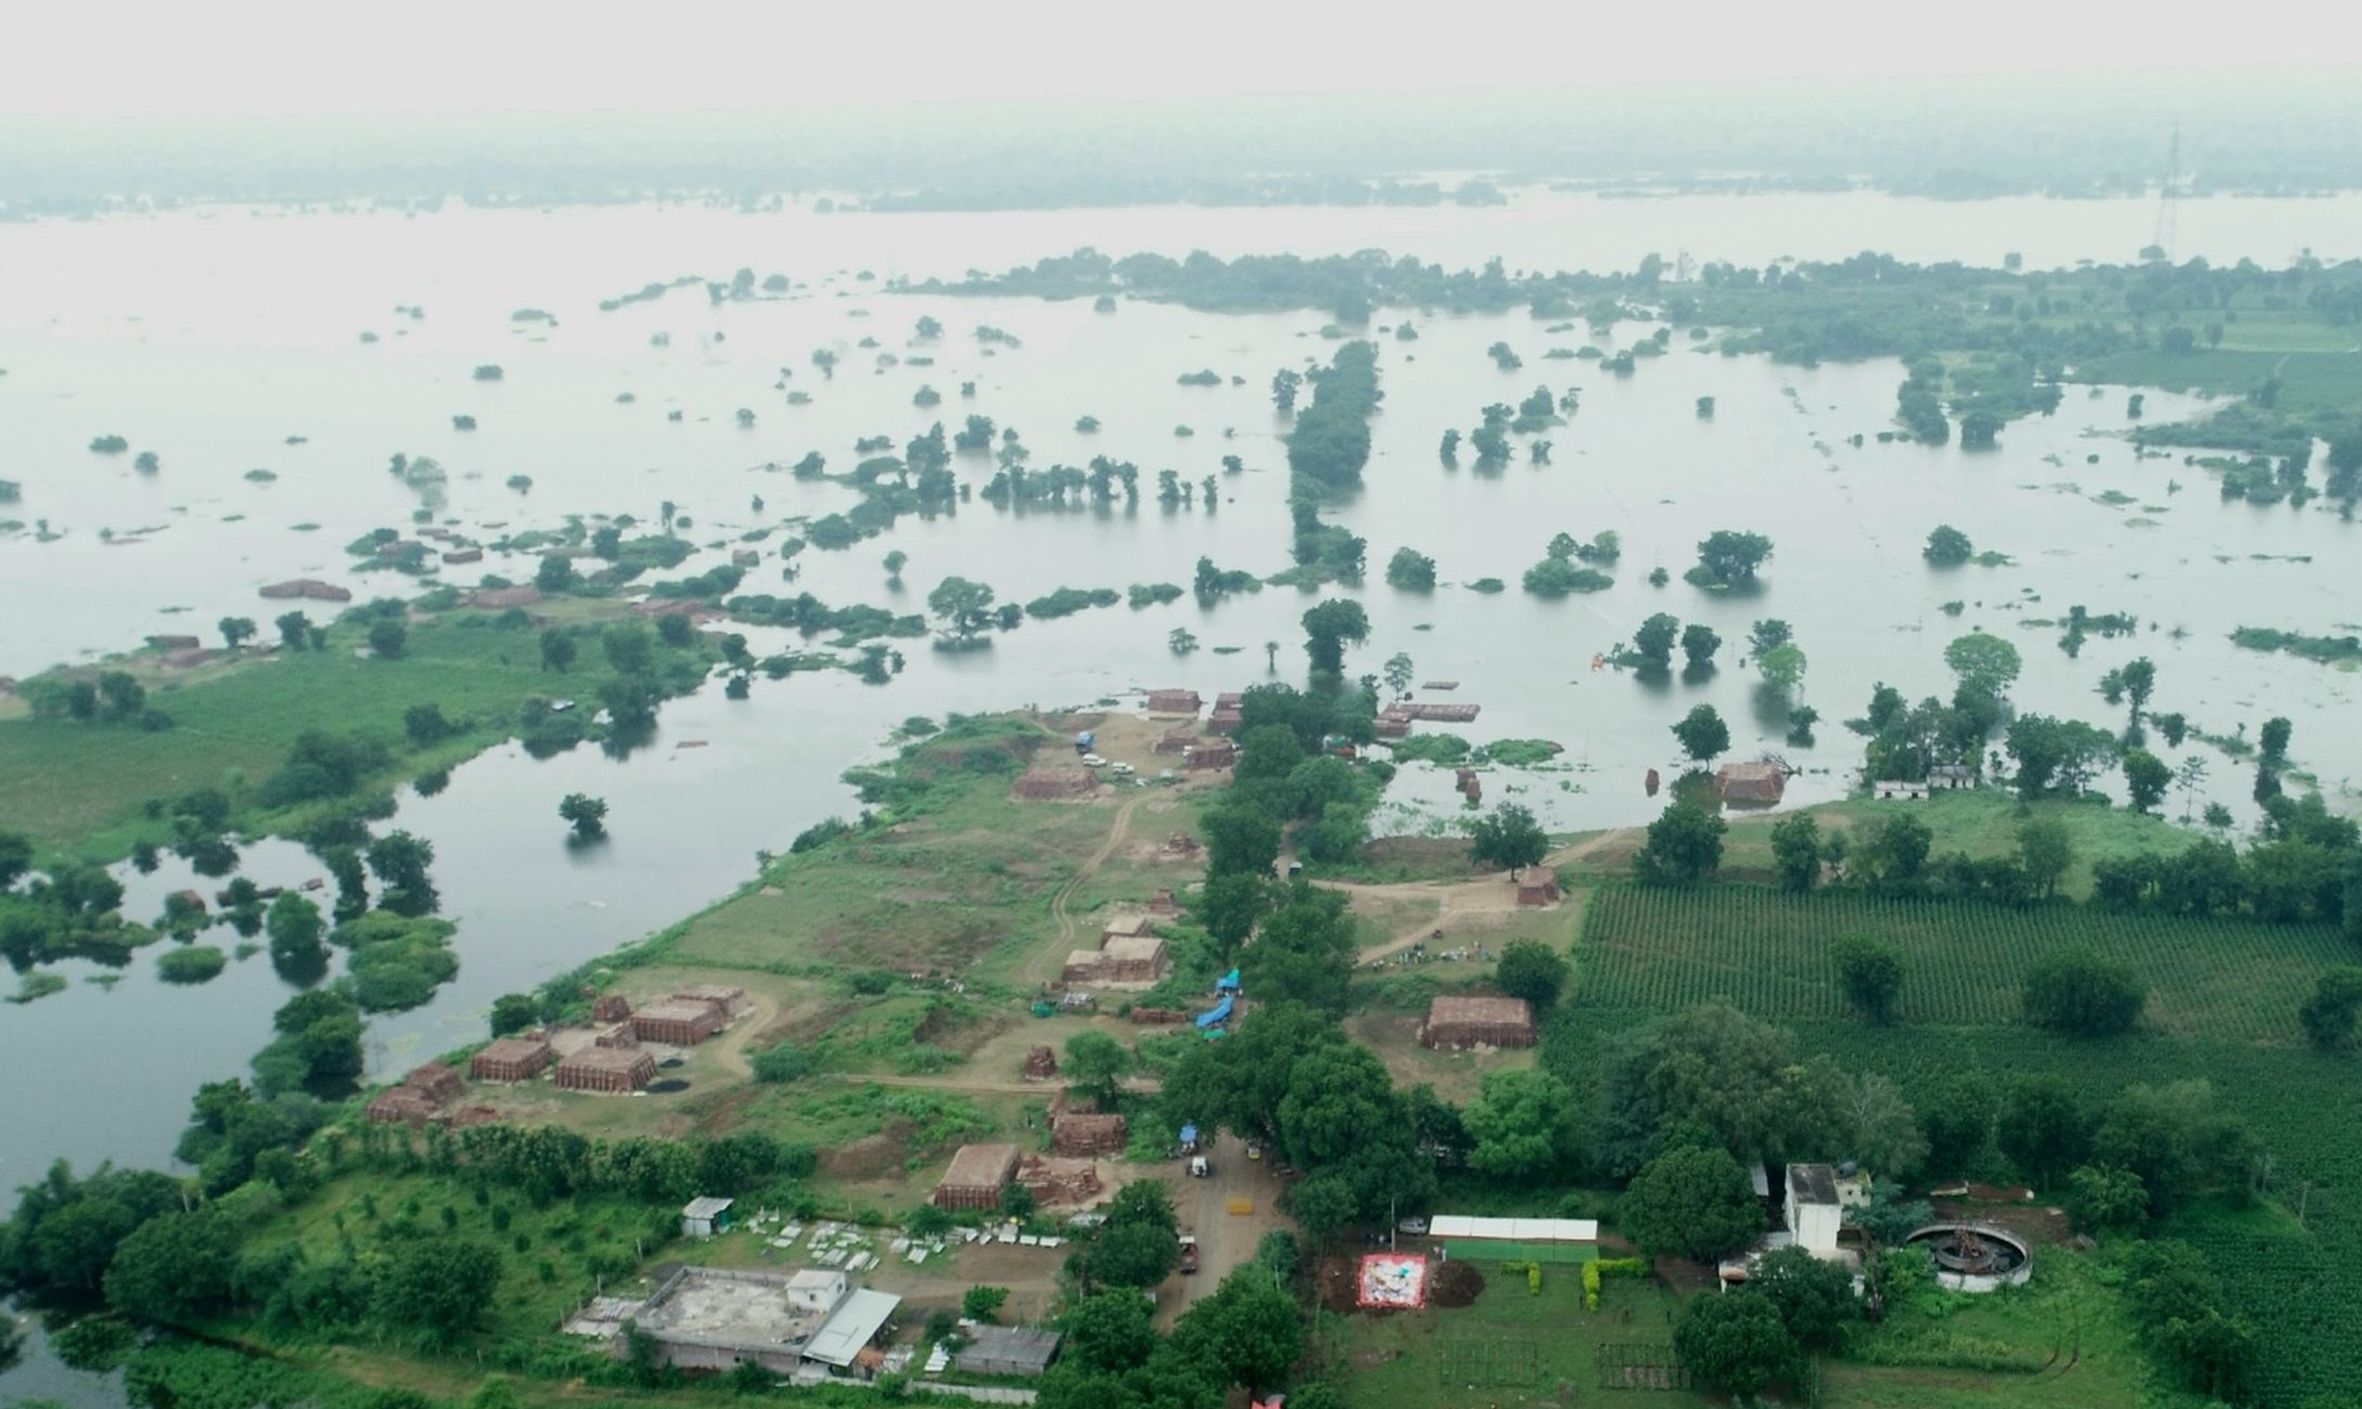 The path of Narmada Parikrama ends in drowning